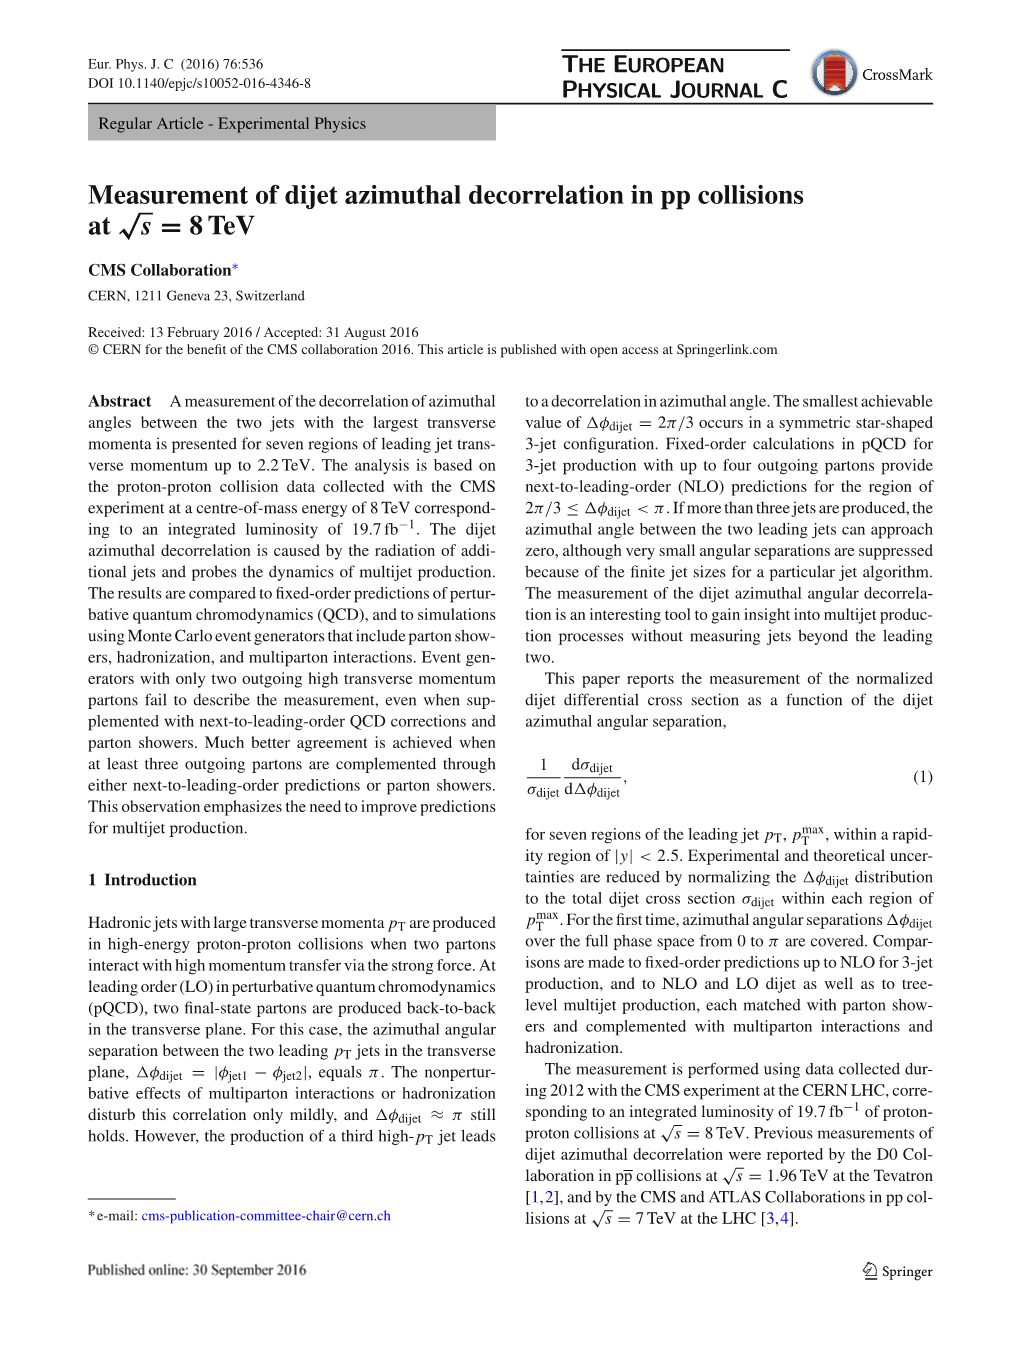 Measurement of Dijet Azimuthal Decorrelation in Pp Collisions at $\Sqrt {S} $= 8